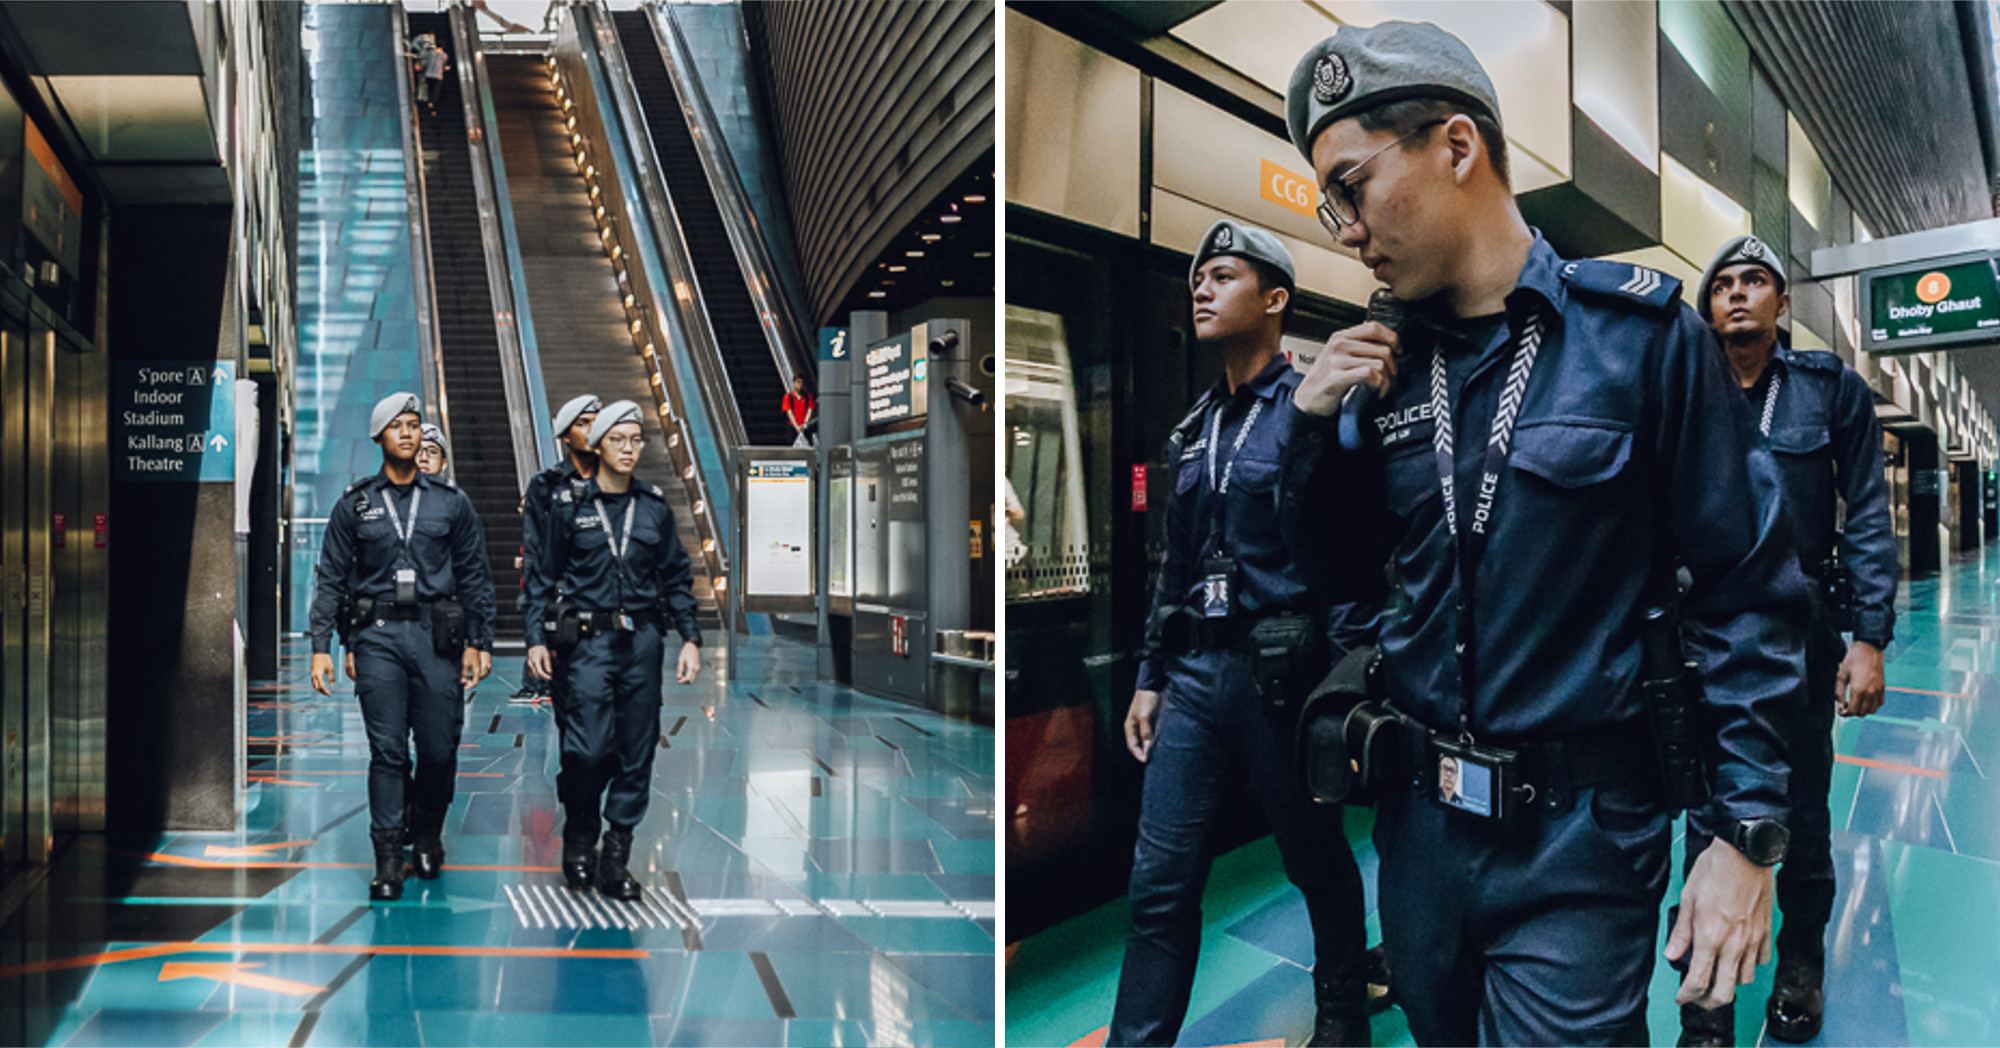 TransCom Police Officers: Safeguarding Our Public Transport Network